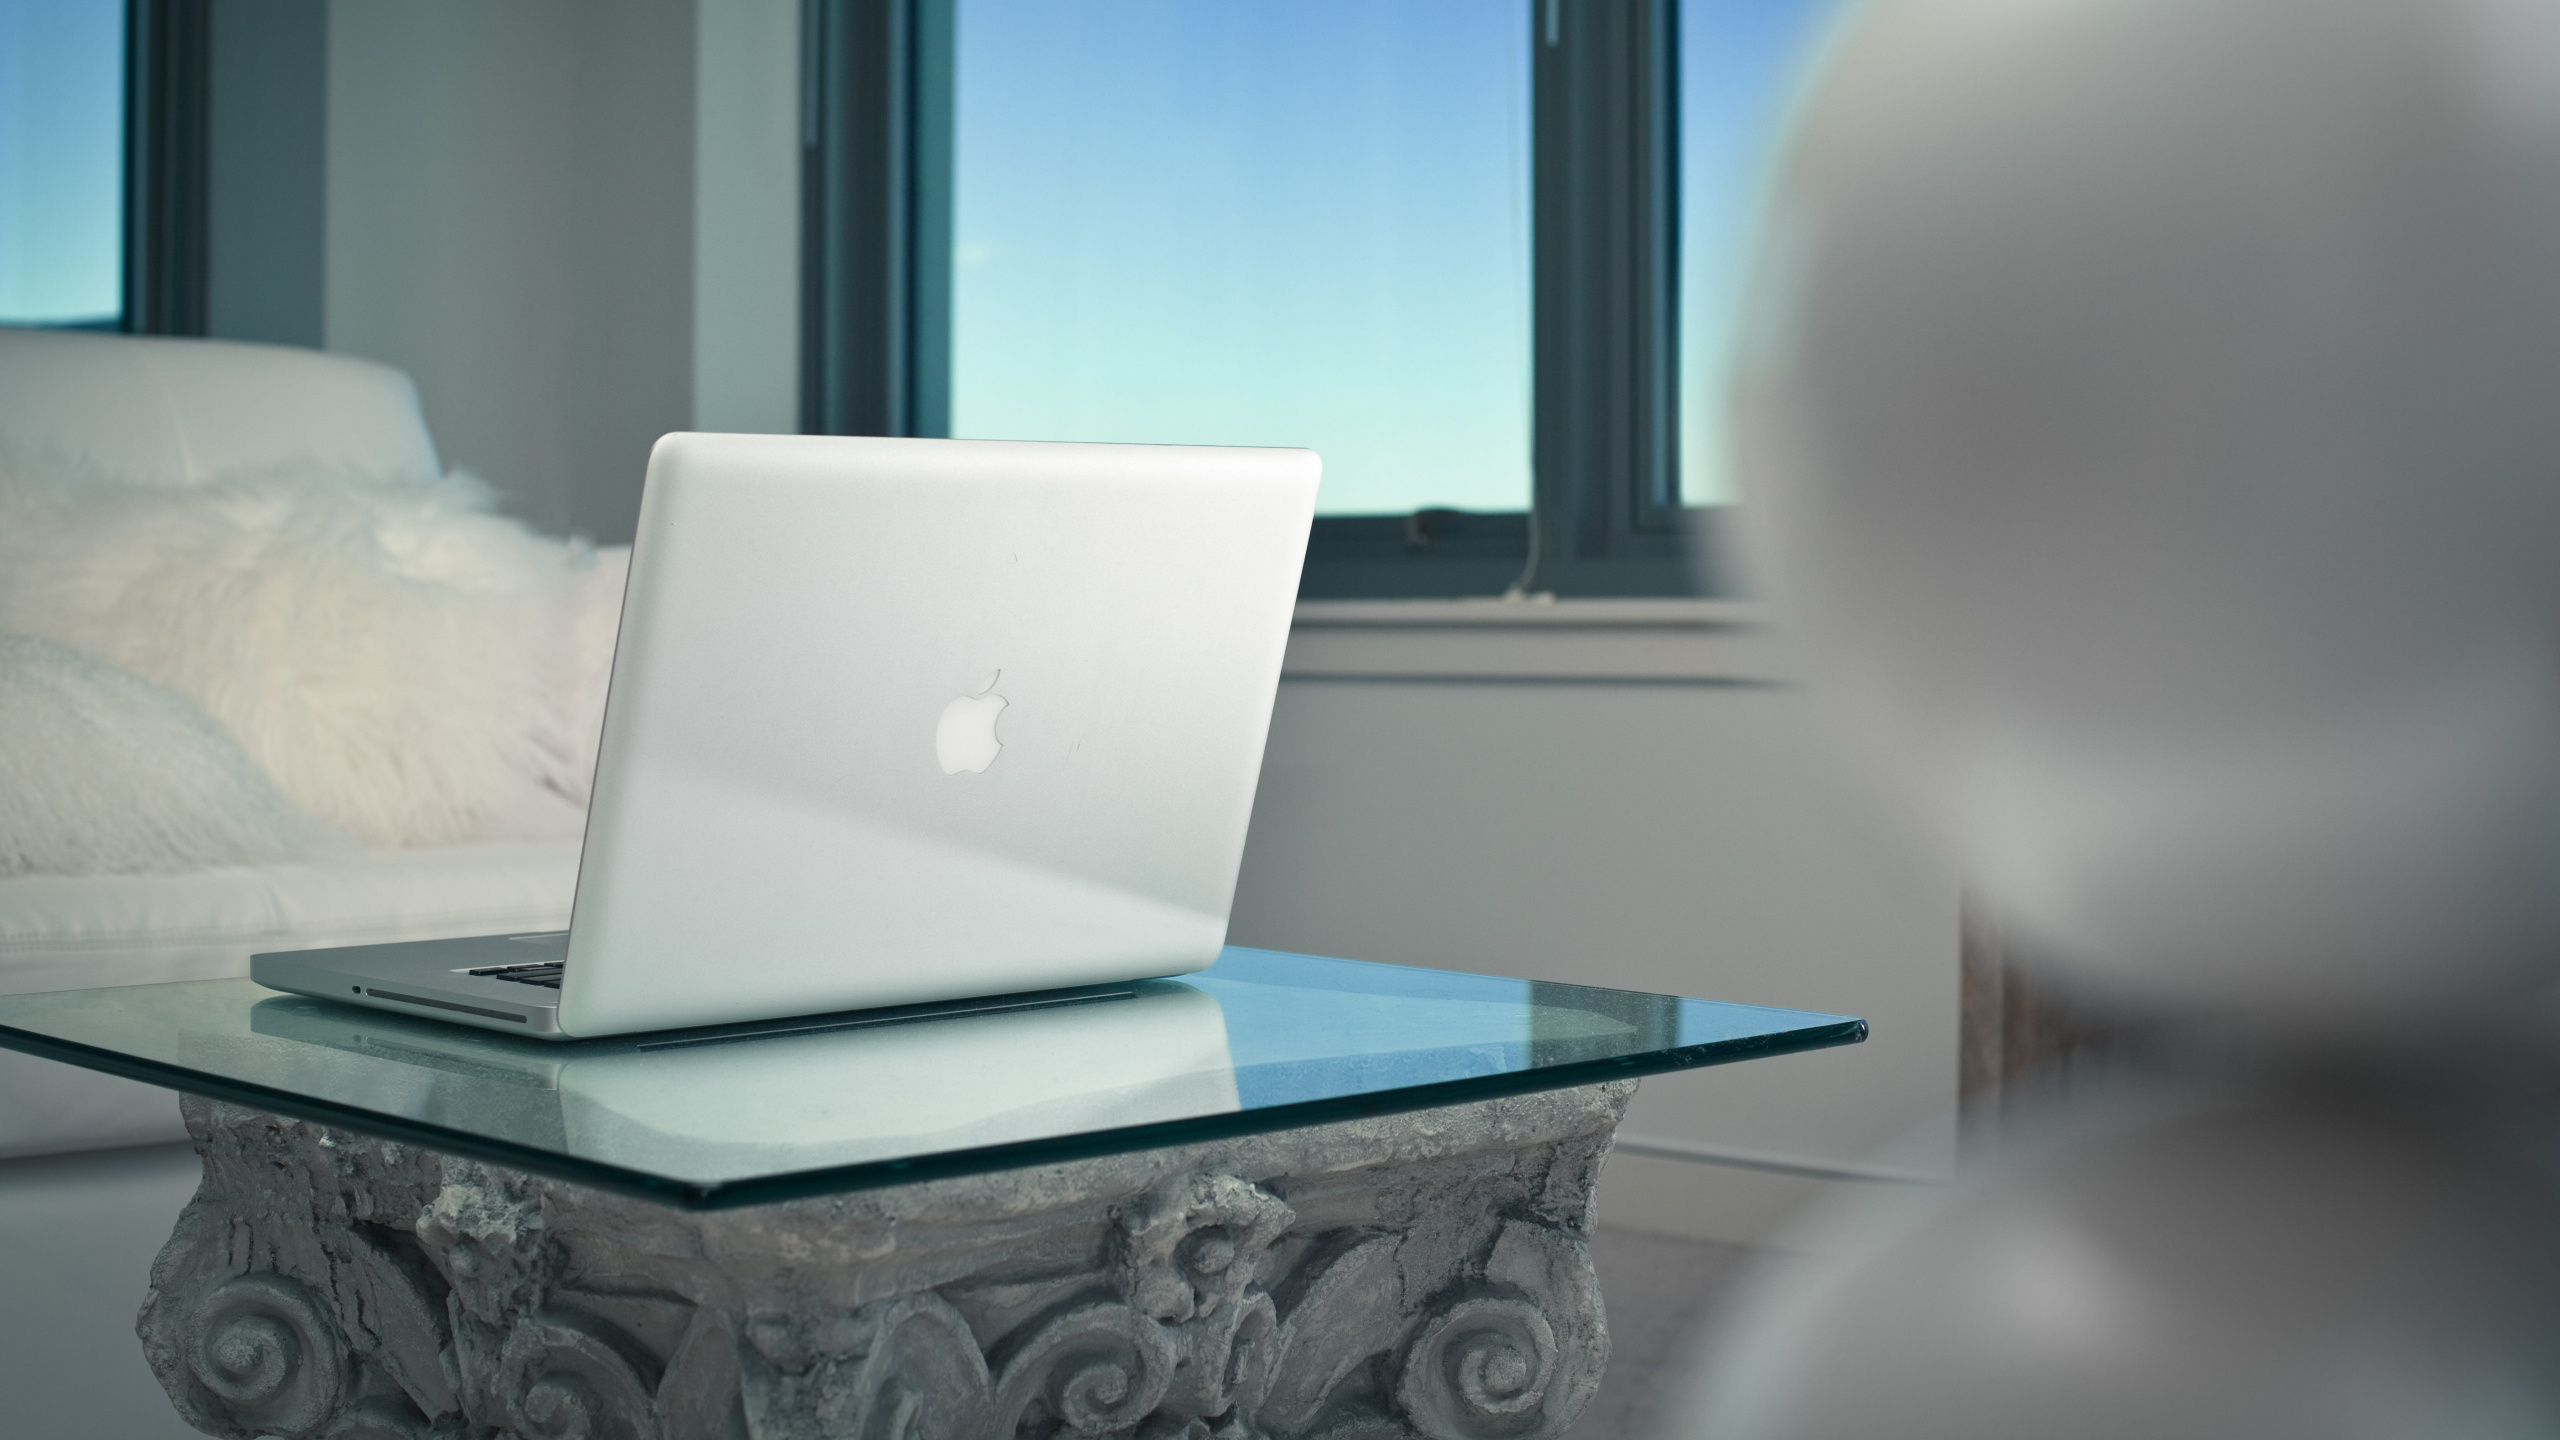 Silver Macbook on Green Table. Wallpaper in 2560x1440 Resolution